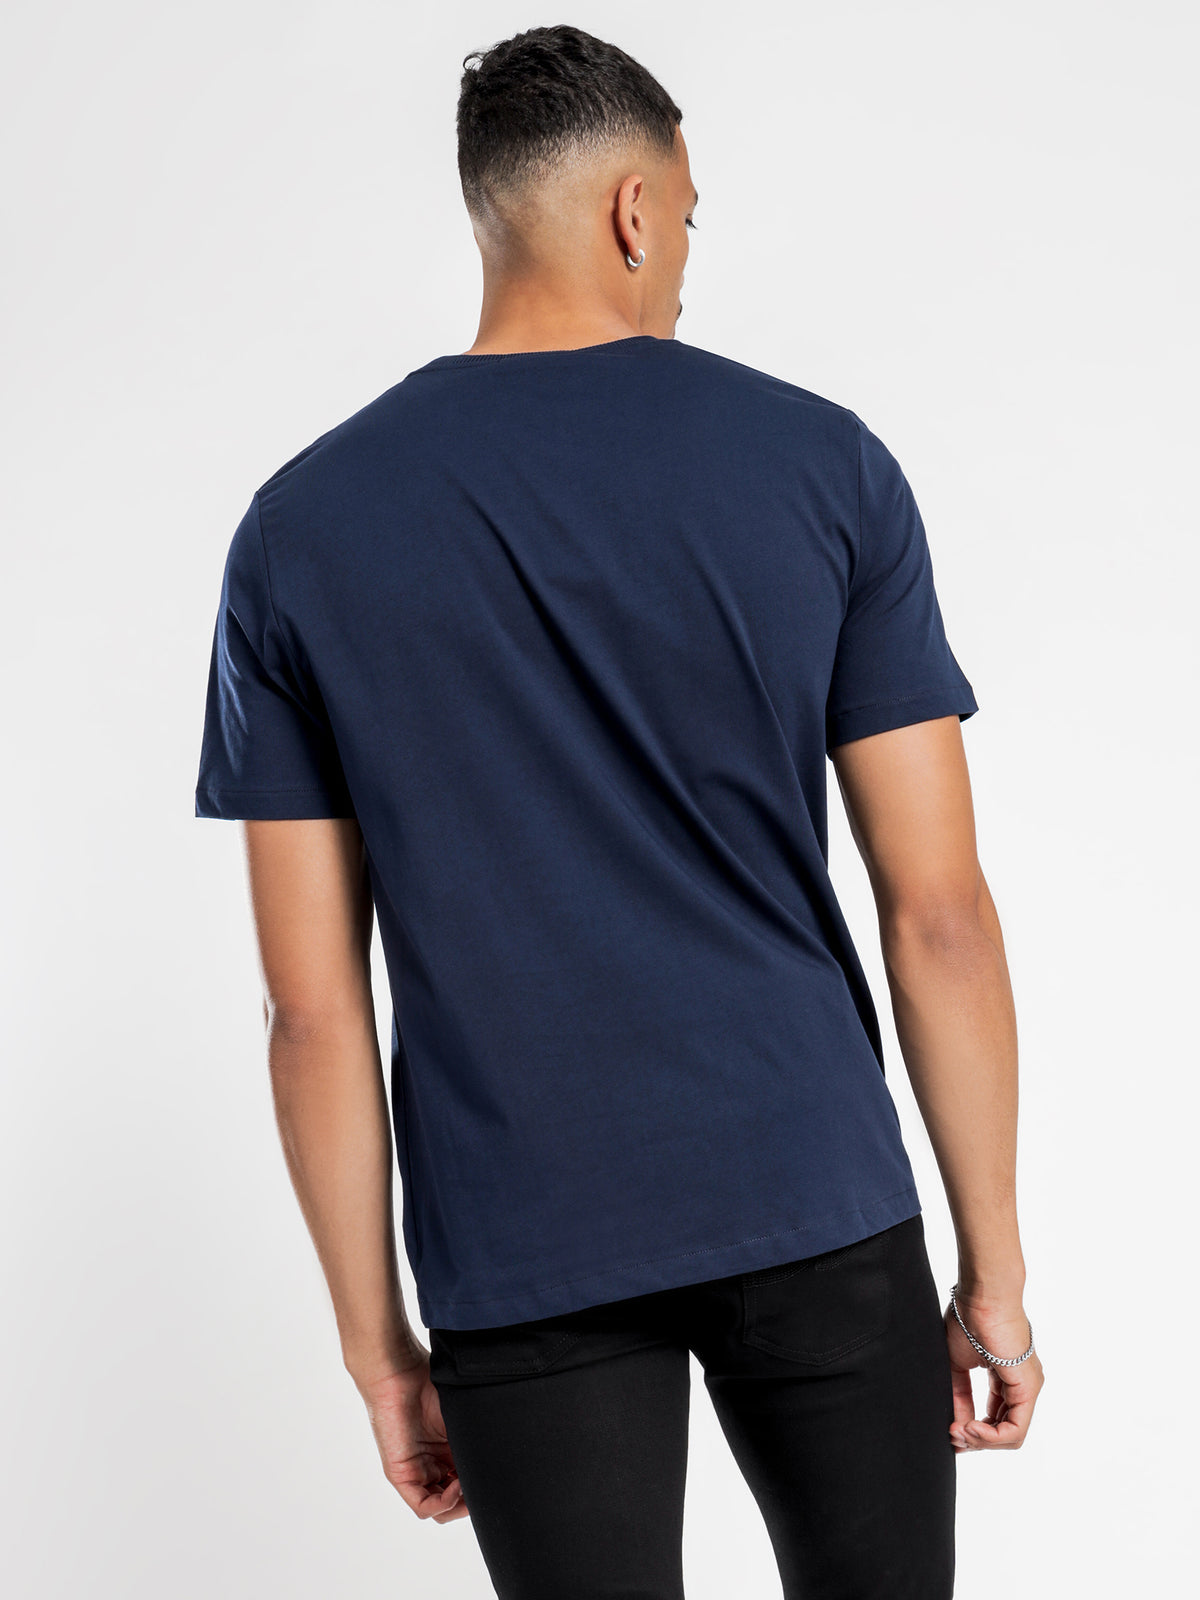 Graphic T-Shirt in Carbon Blue